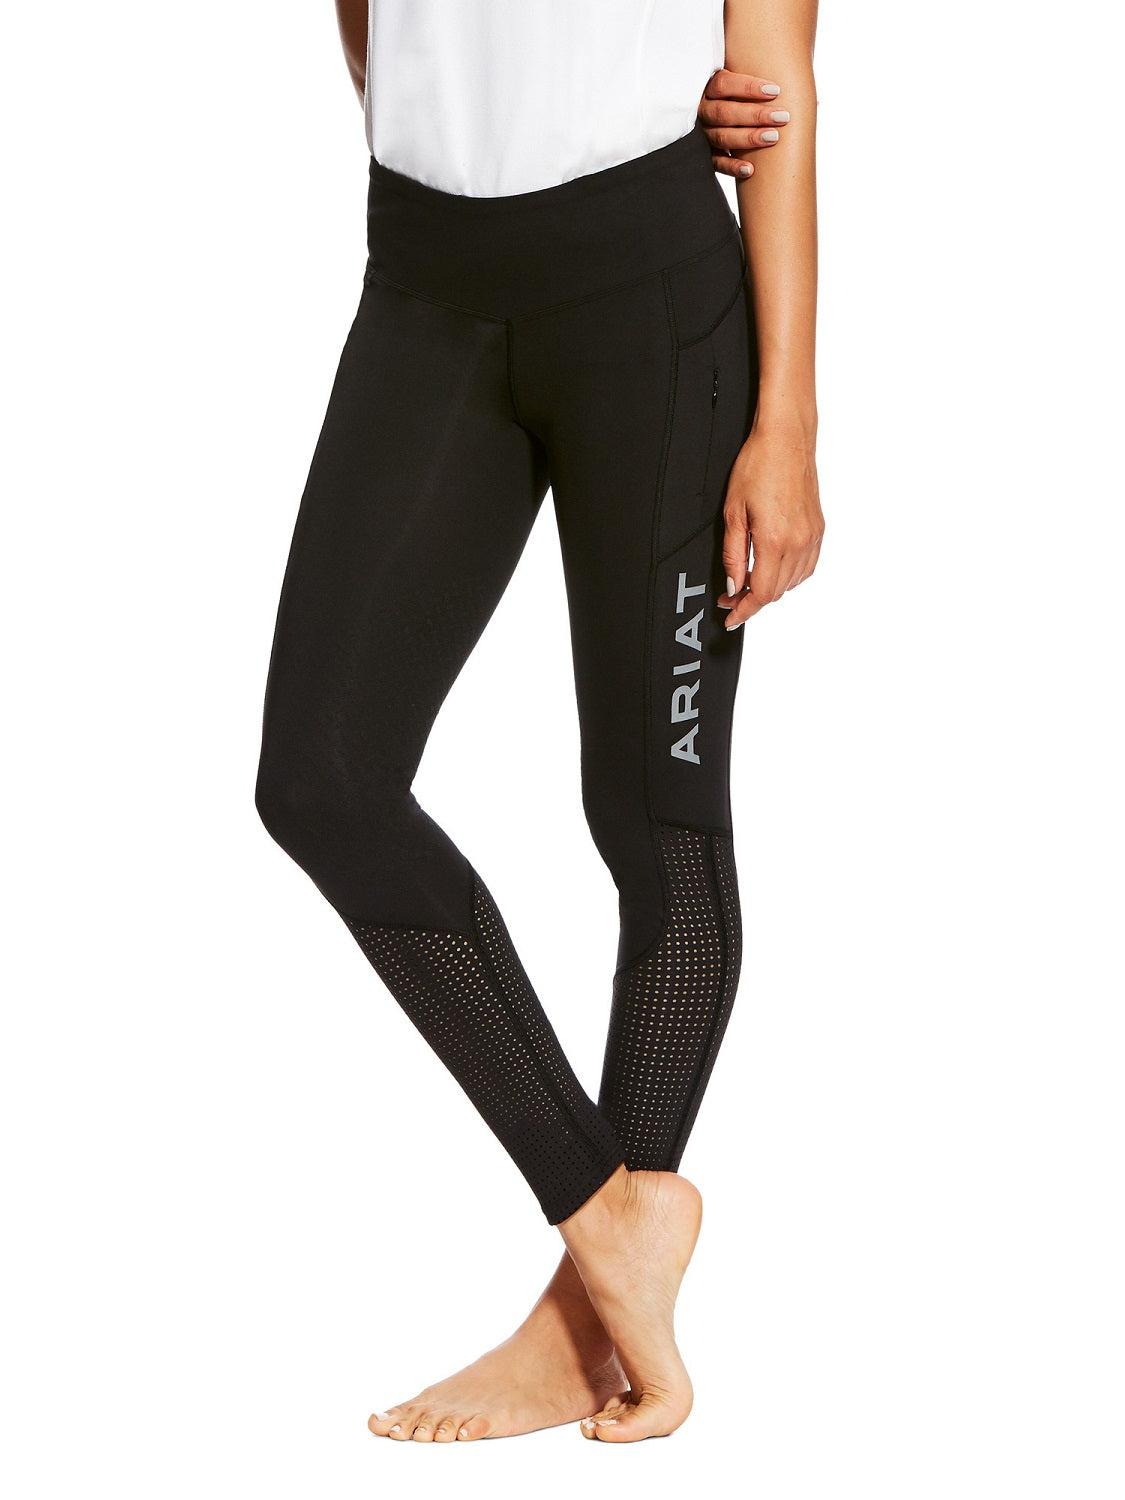 ARIAT Riding Tights - Eos Knee Patch - Black